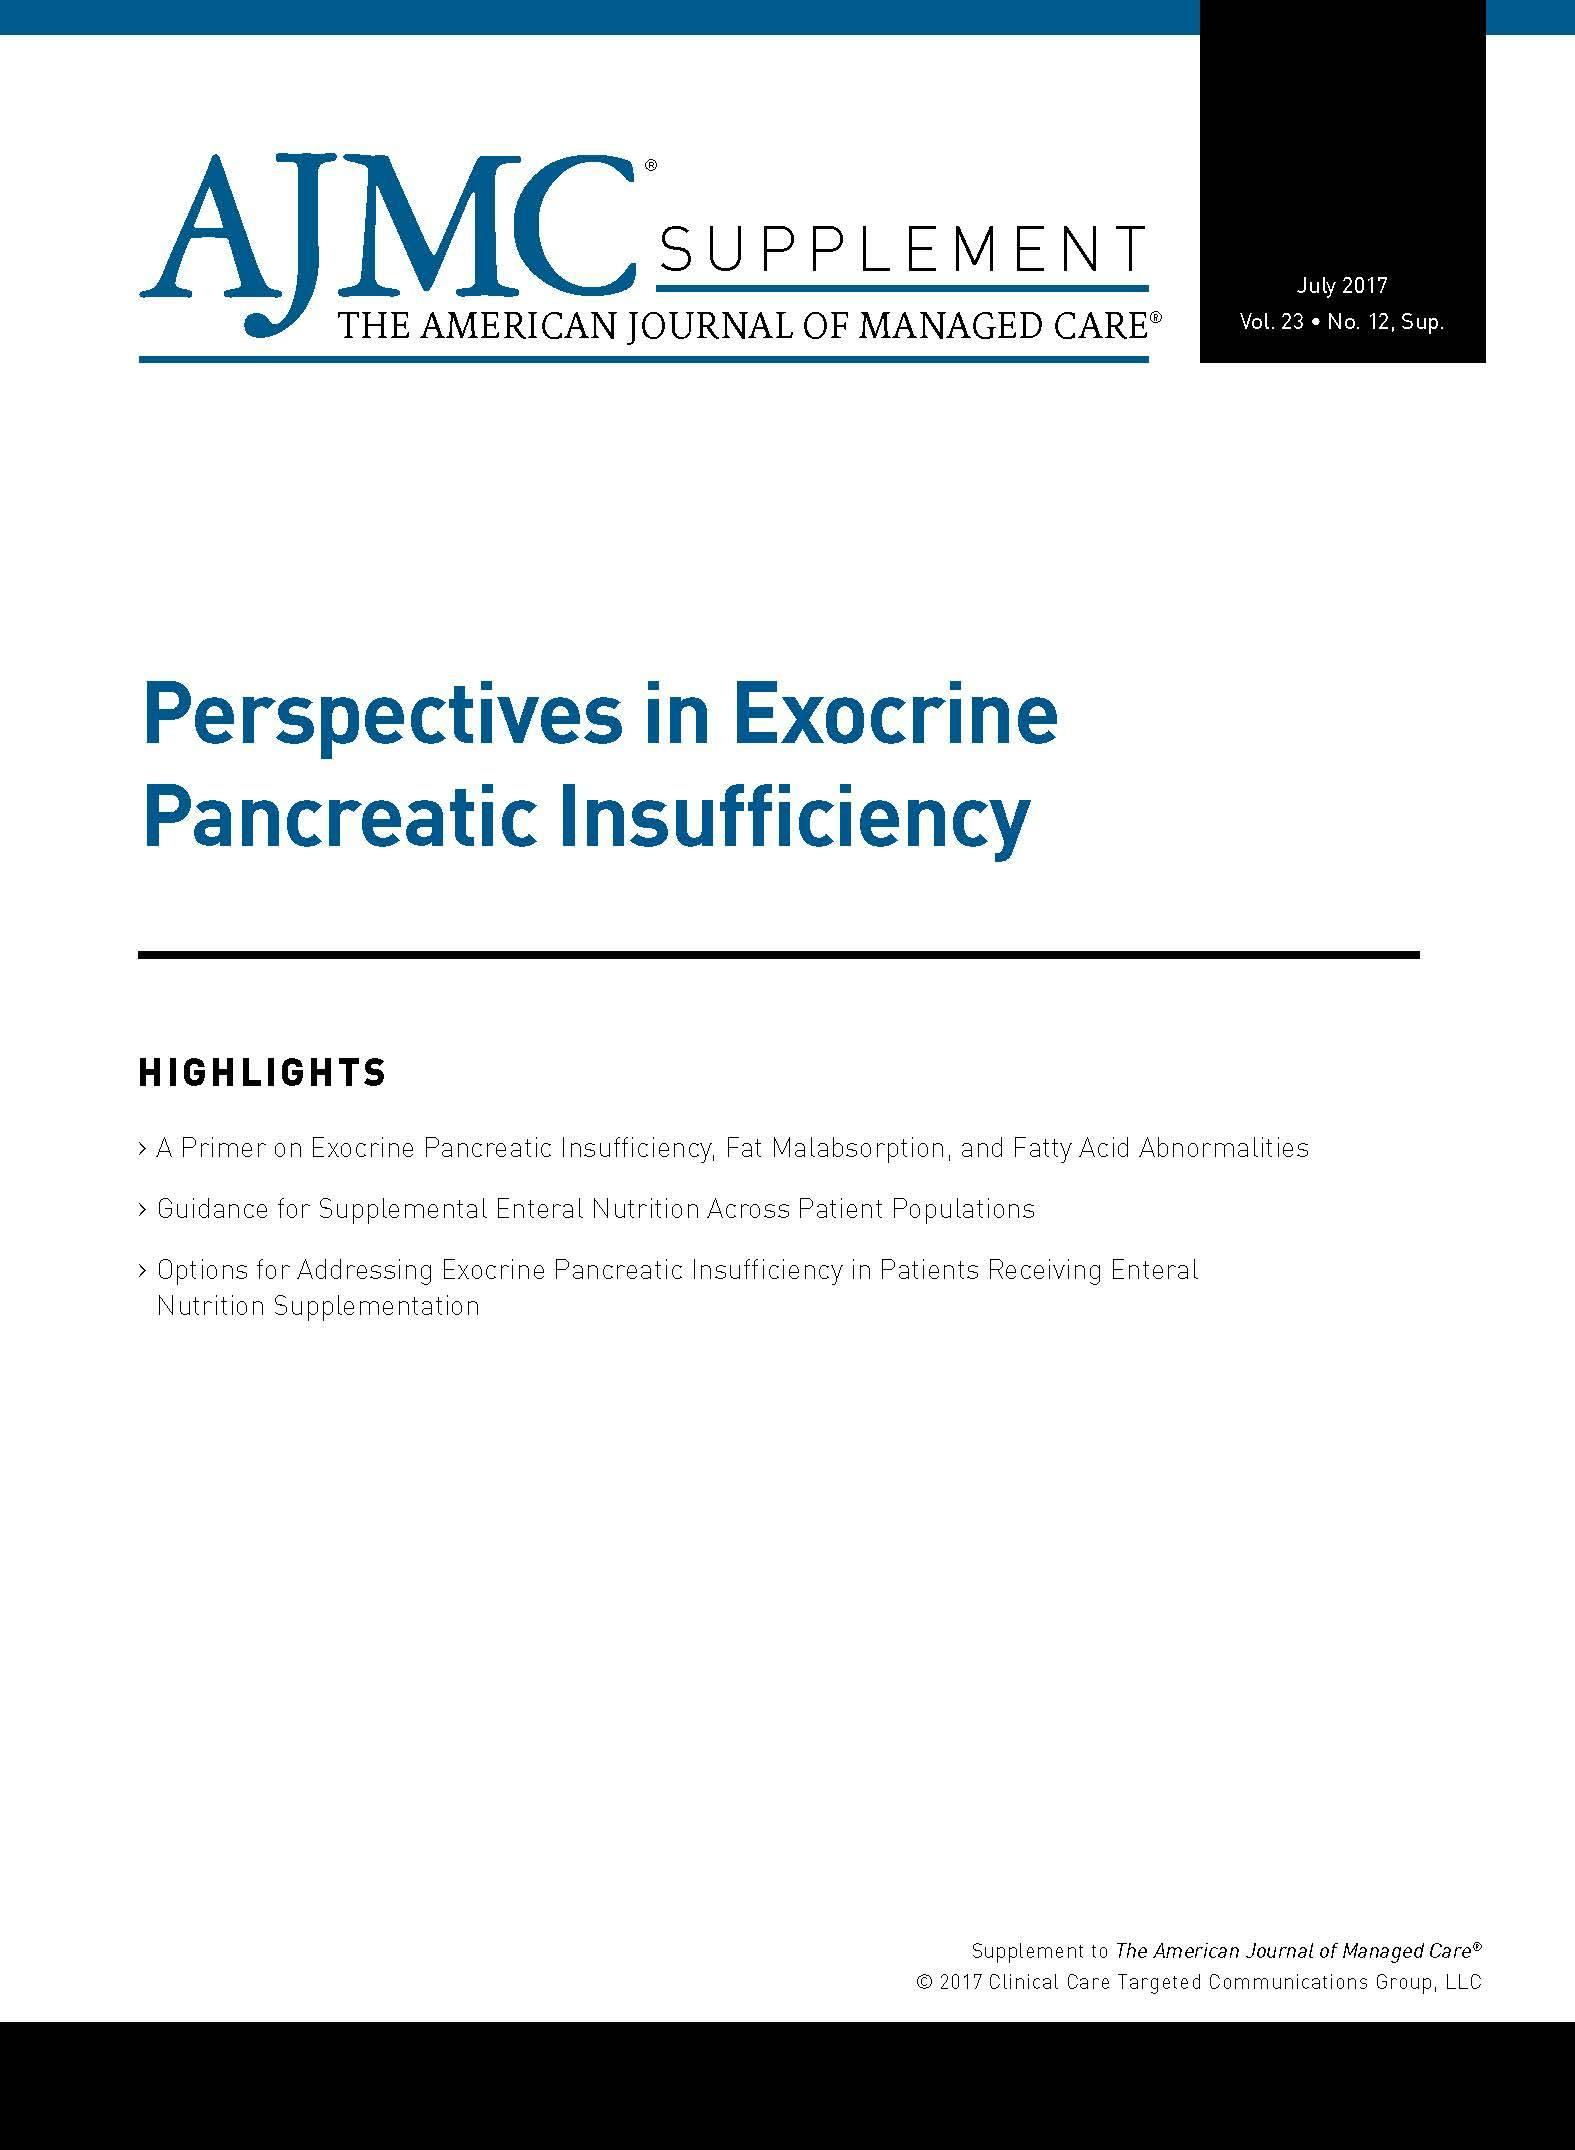 Perspectives in Exocrine Pancreatic Insufficiency